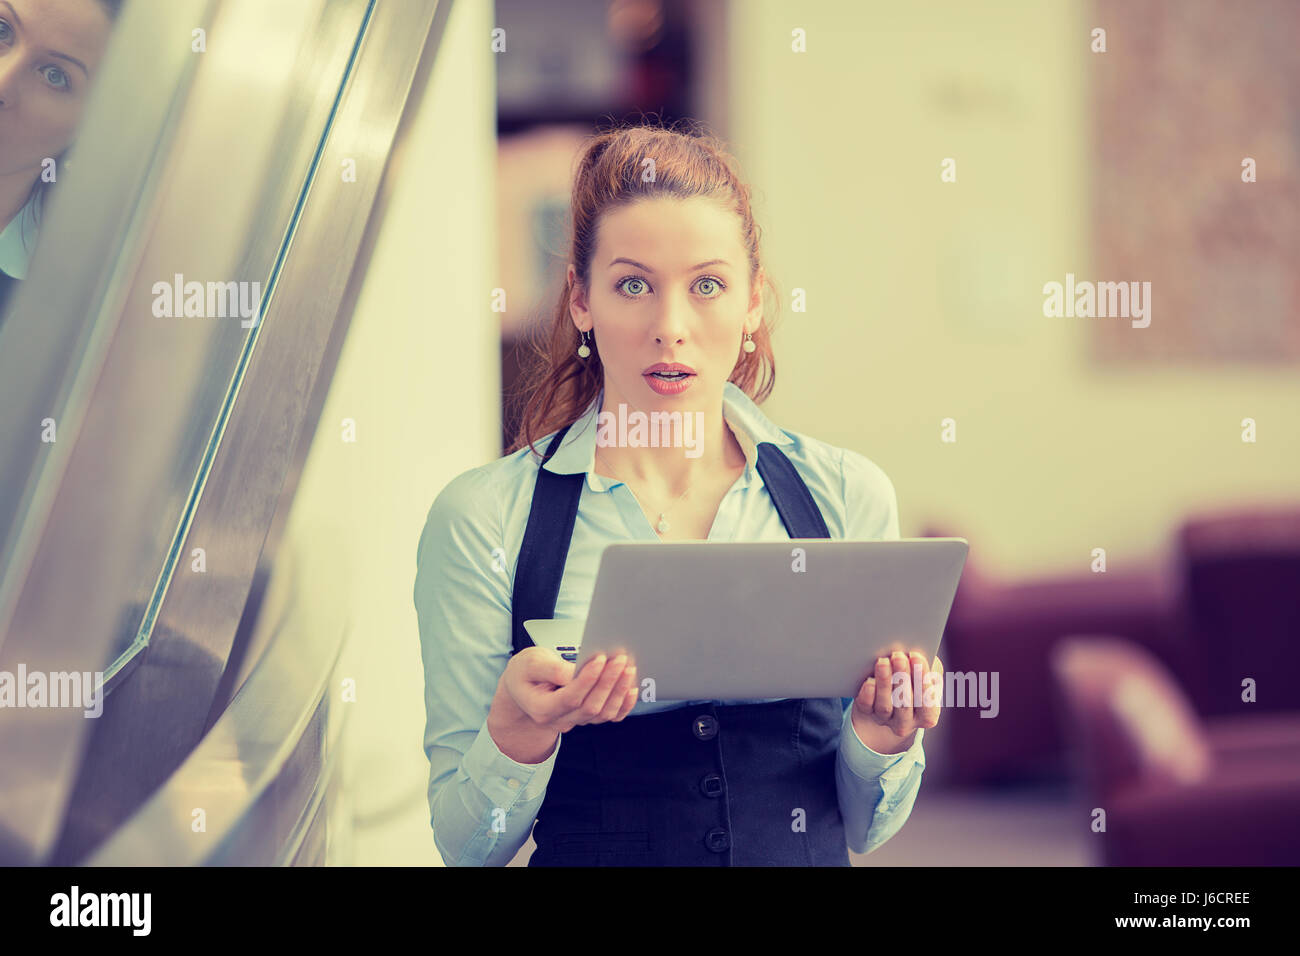 Portrait anxious young girl looking at camera seeing bad news or photos on computer, disgusting shocked emotion on her face isolated office windows ba Stock Photo